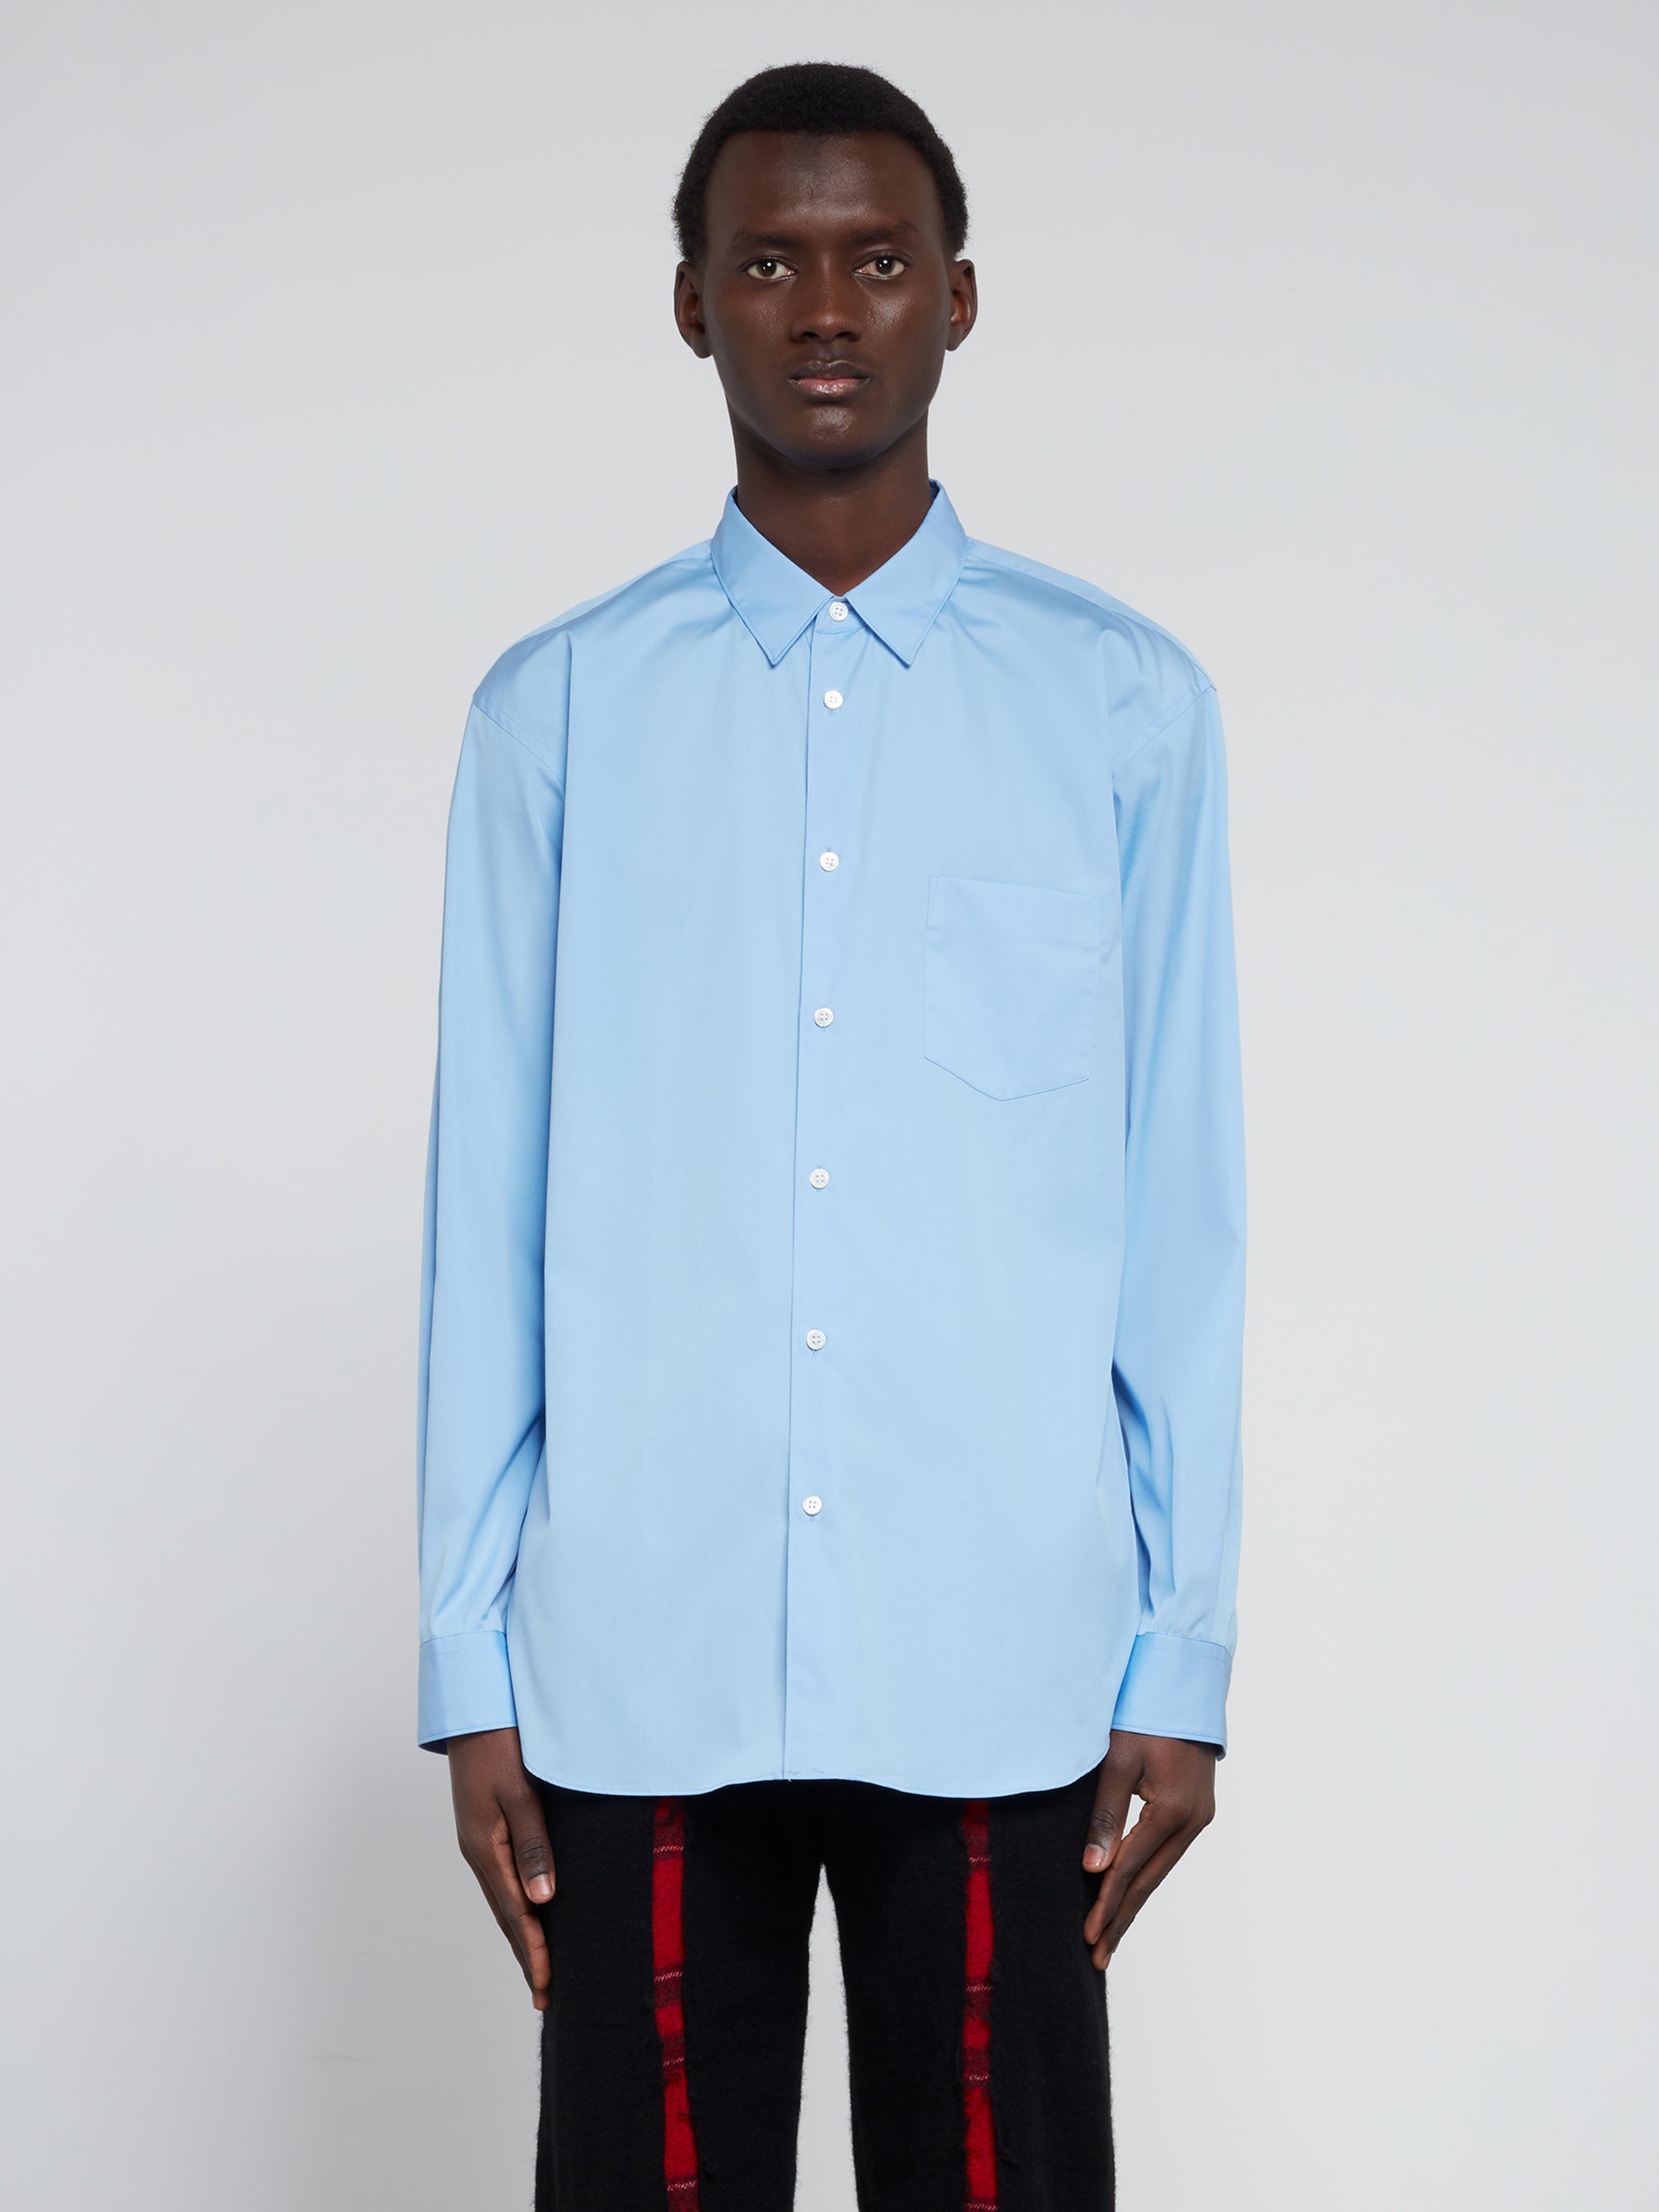 CDG Shirt Forever - Classic Fit Woven Cotton Shirt - (Baby Blue) view 2